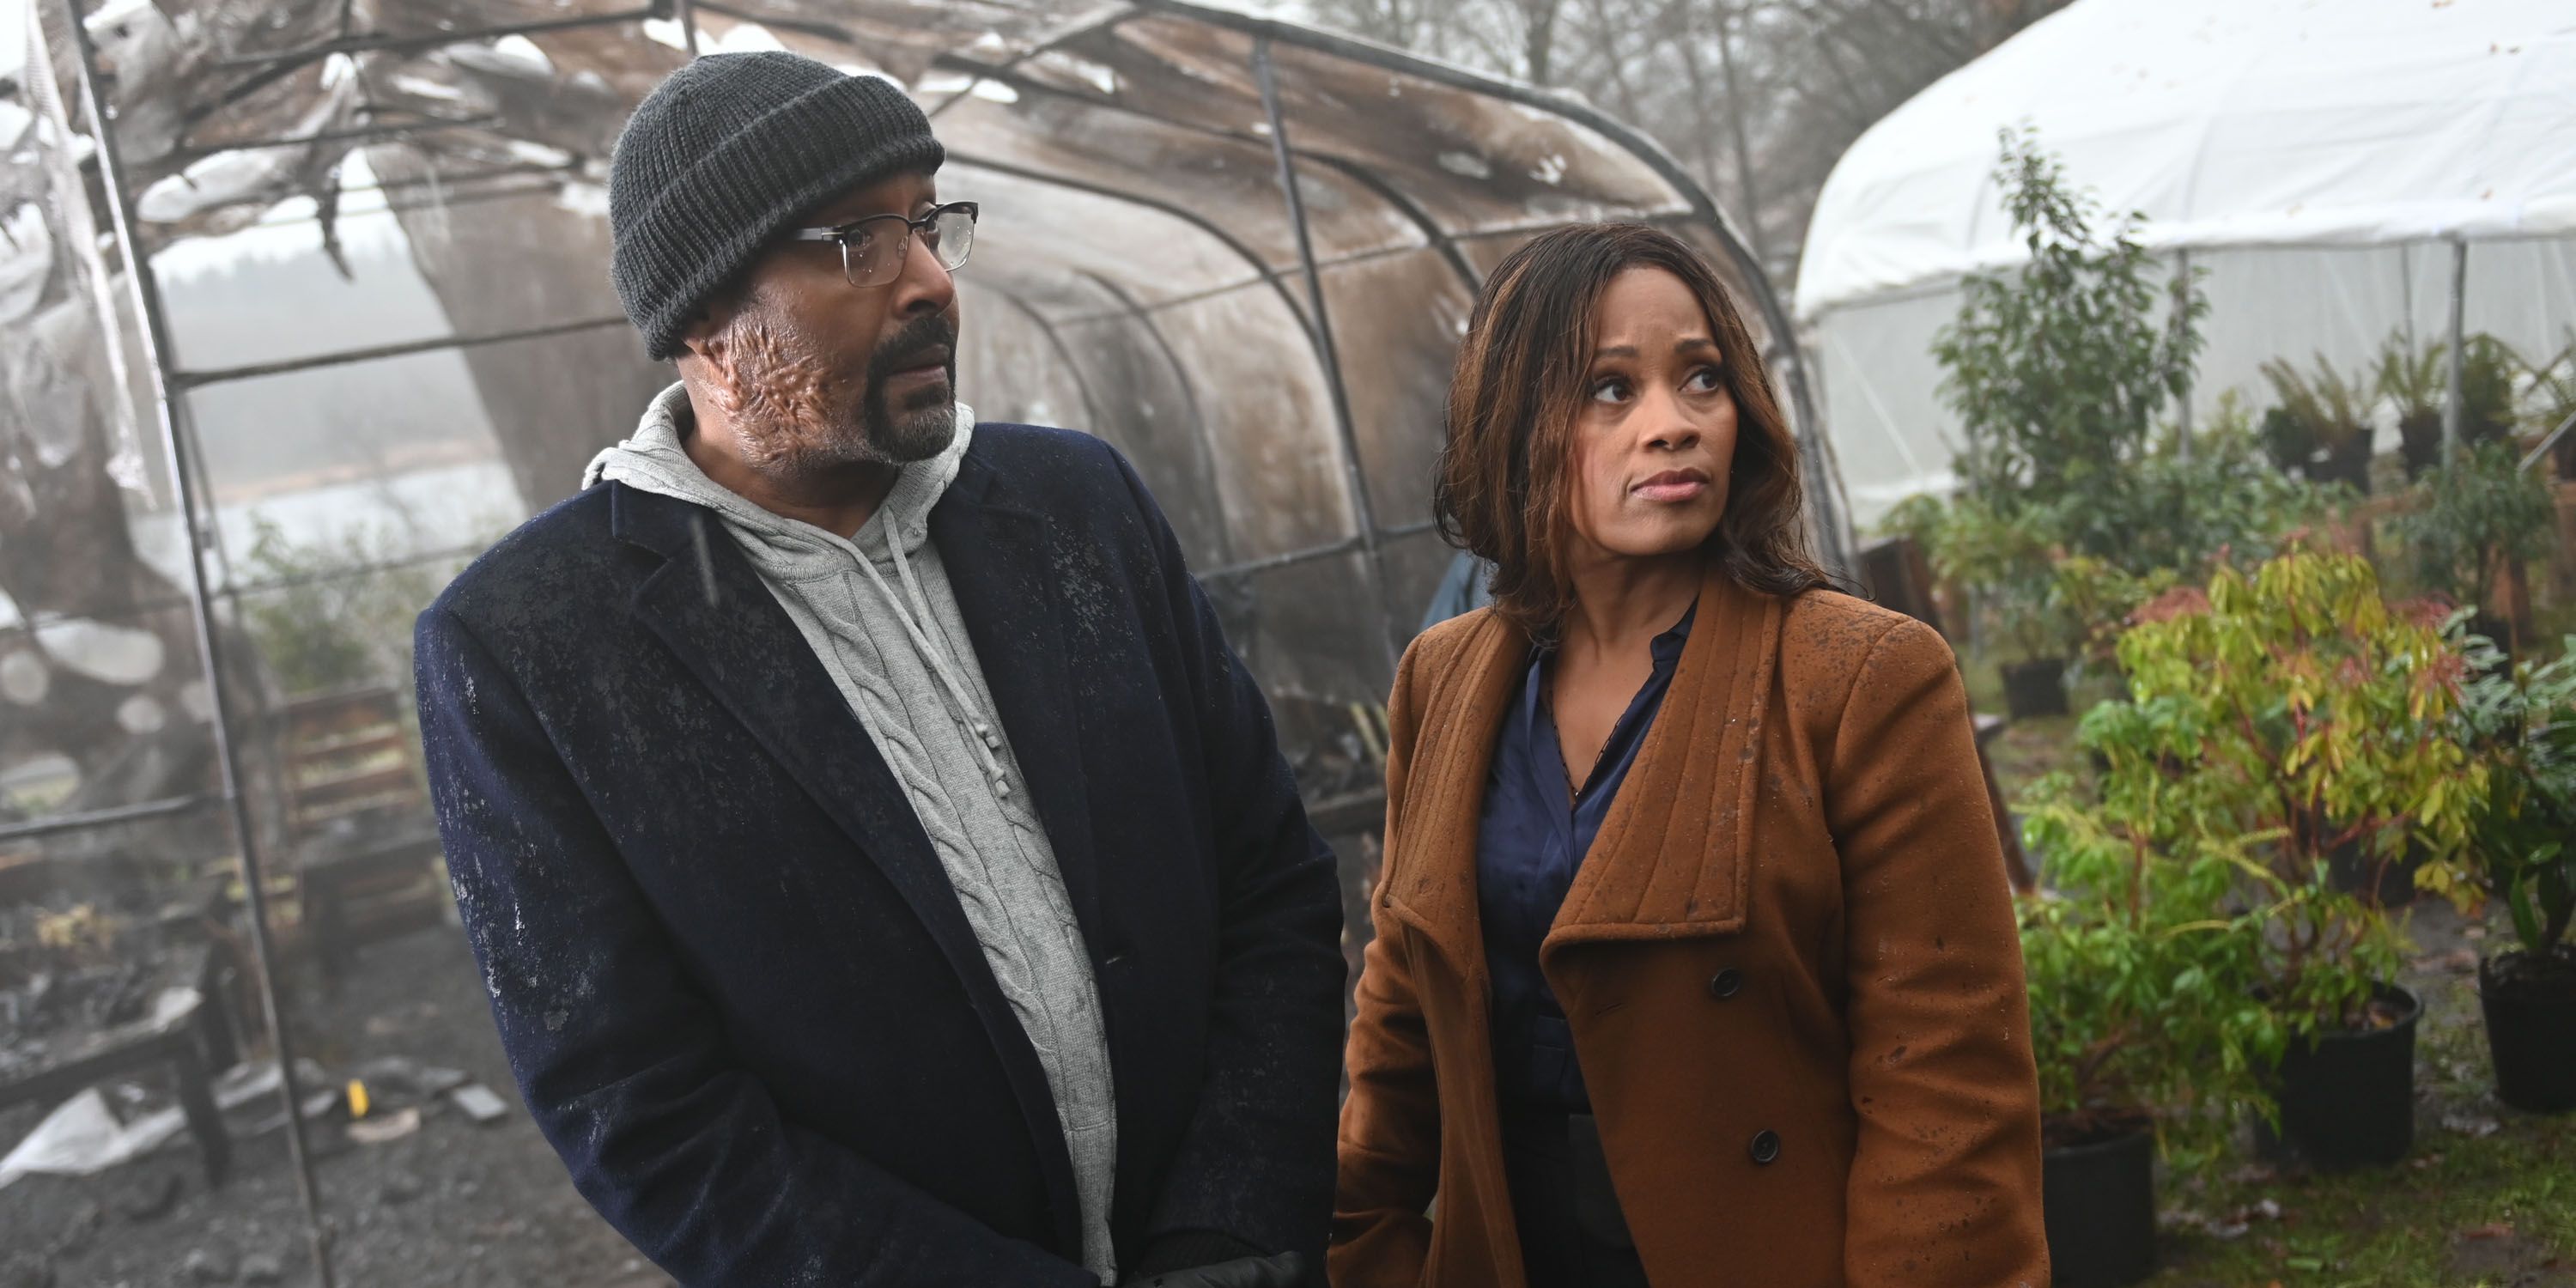 Jesse L. Martin as Alec Mercer and Maahra Hill as Marisa in a greenhouse in The Irrational 108.